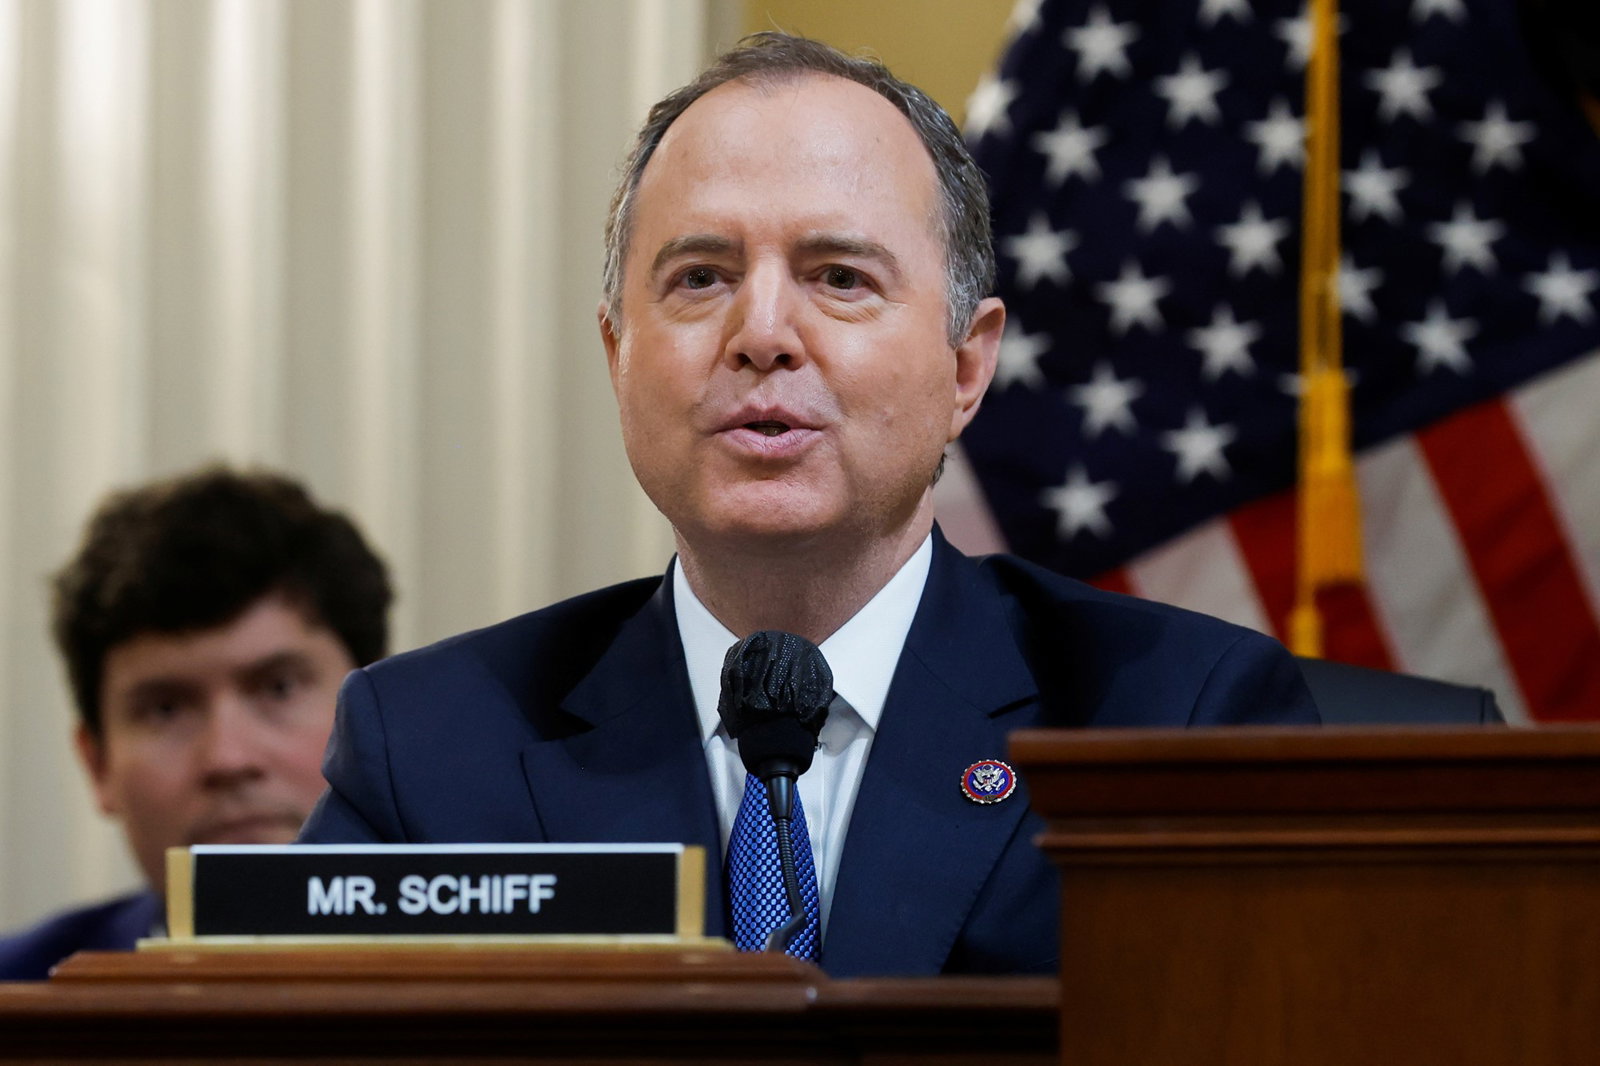 Adam Schiff speaks into a microphone while sitting at a desk behind a nameplate